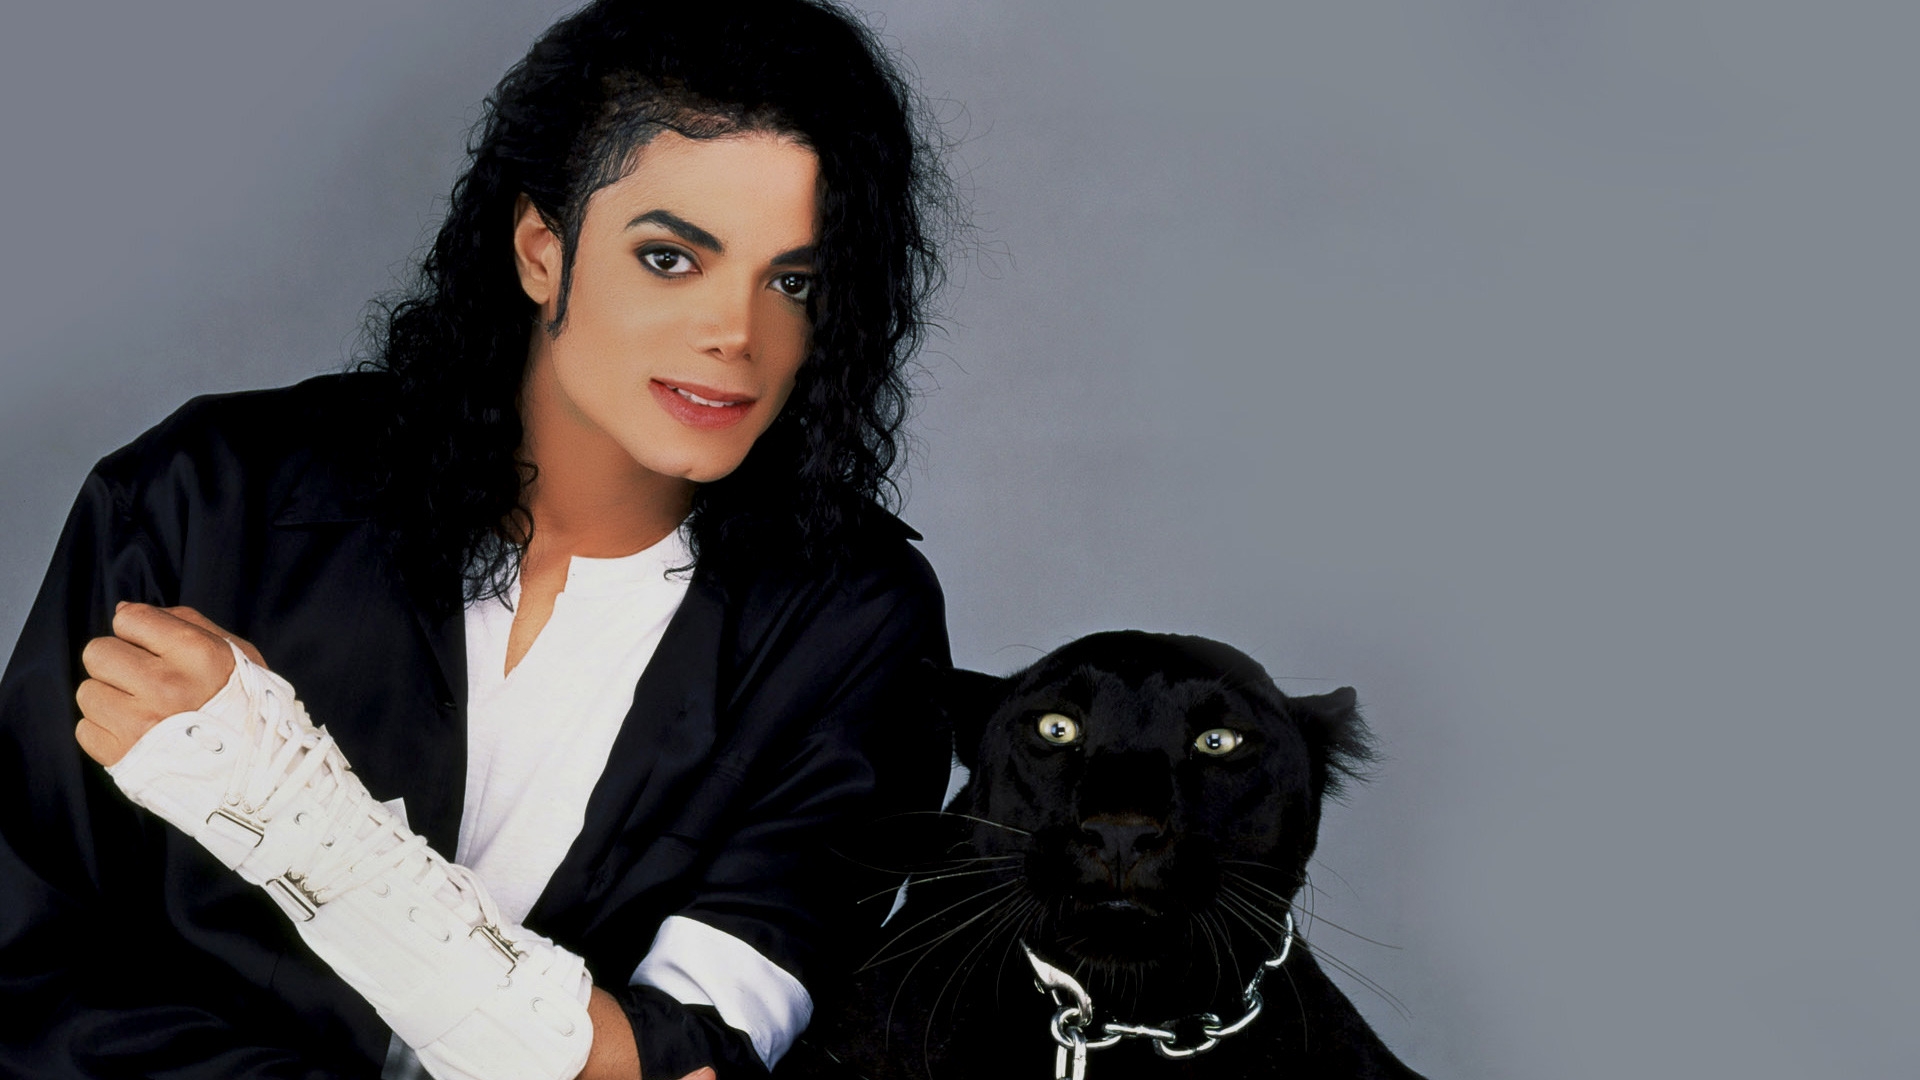 Michael Jackson Panther for 1920 x 1080 HDTV 1080p resolution